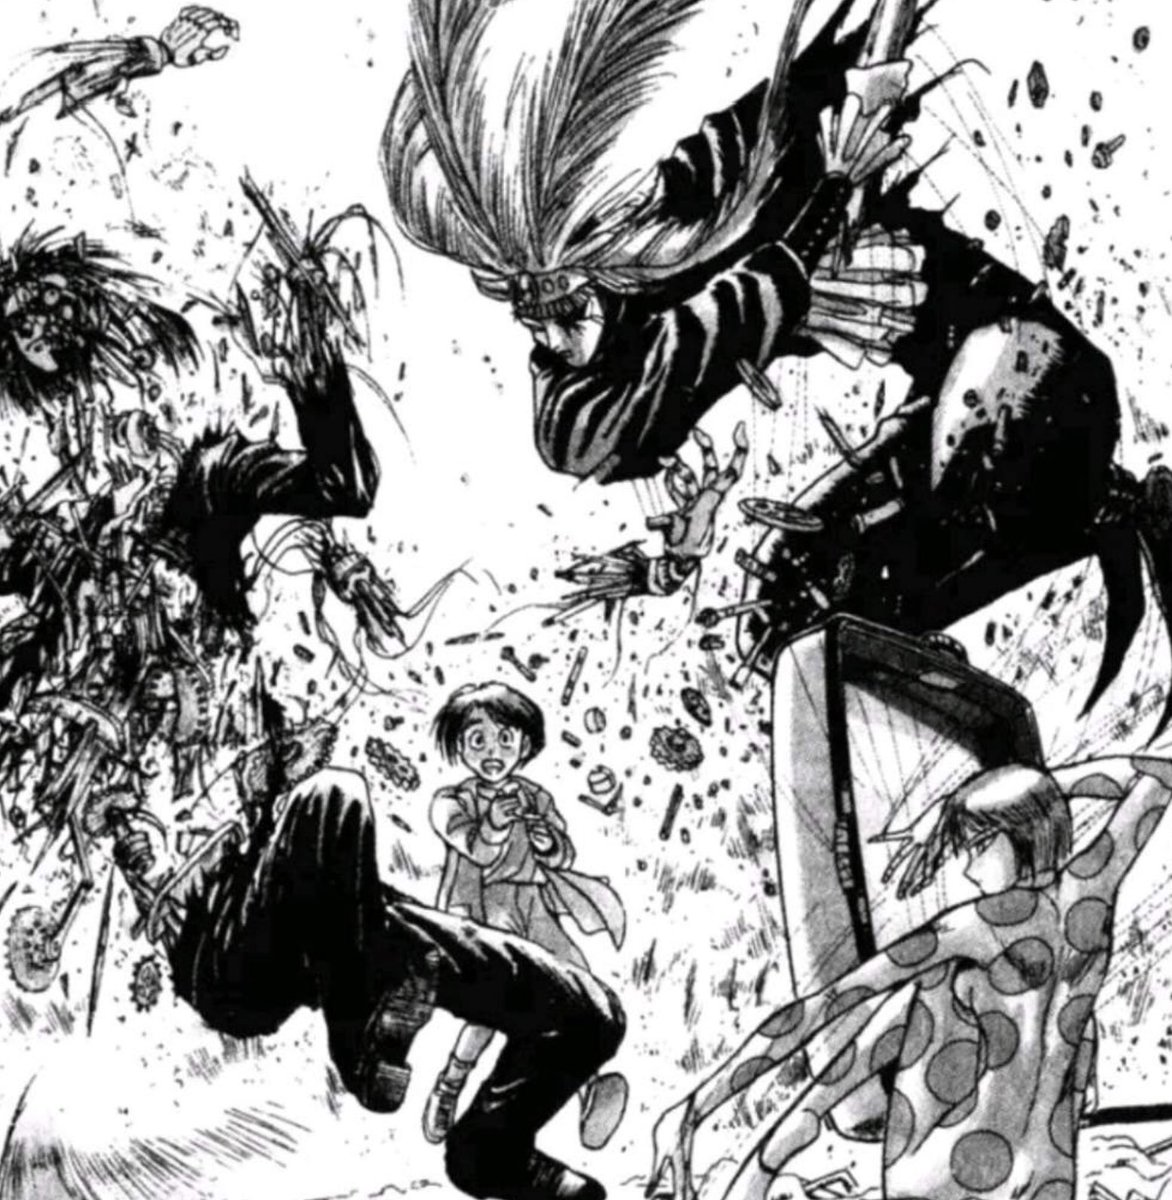 I have quite a few but today Imma focus on Kazuhiro Fujita (Ushio Tora, Karakuri Circus). What drew me to his style is his exaggerated facial expression, flow and composition that somehow exudes energy and grace at the same time. His style is so fluid. Plus dude's is hilarious 😂 https://t.co/YQPKnmIjG2 